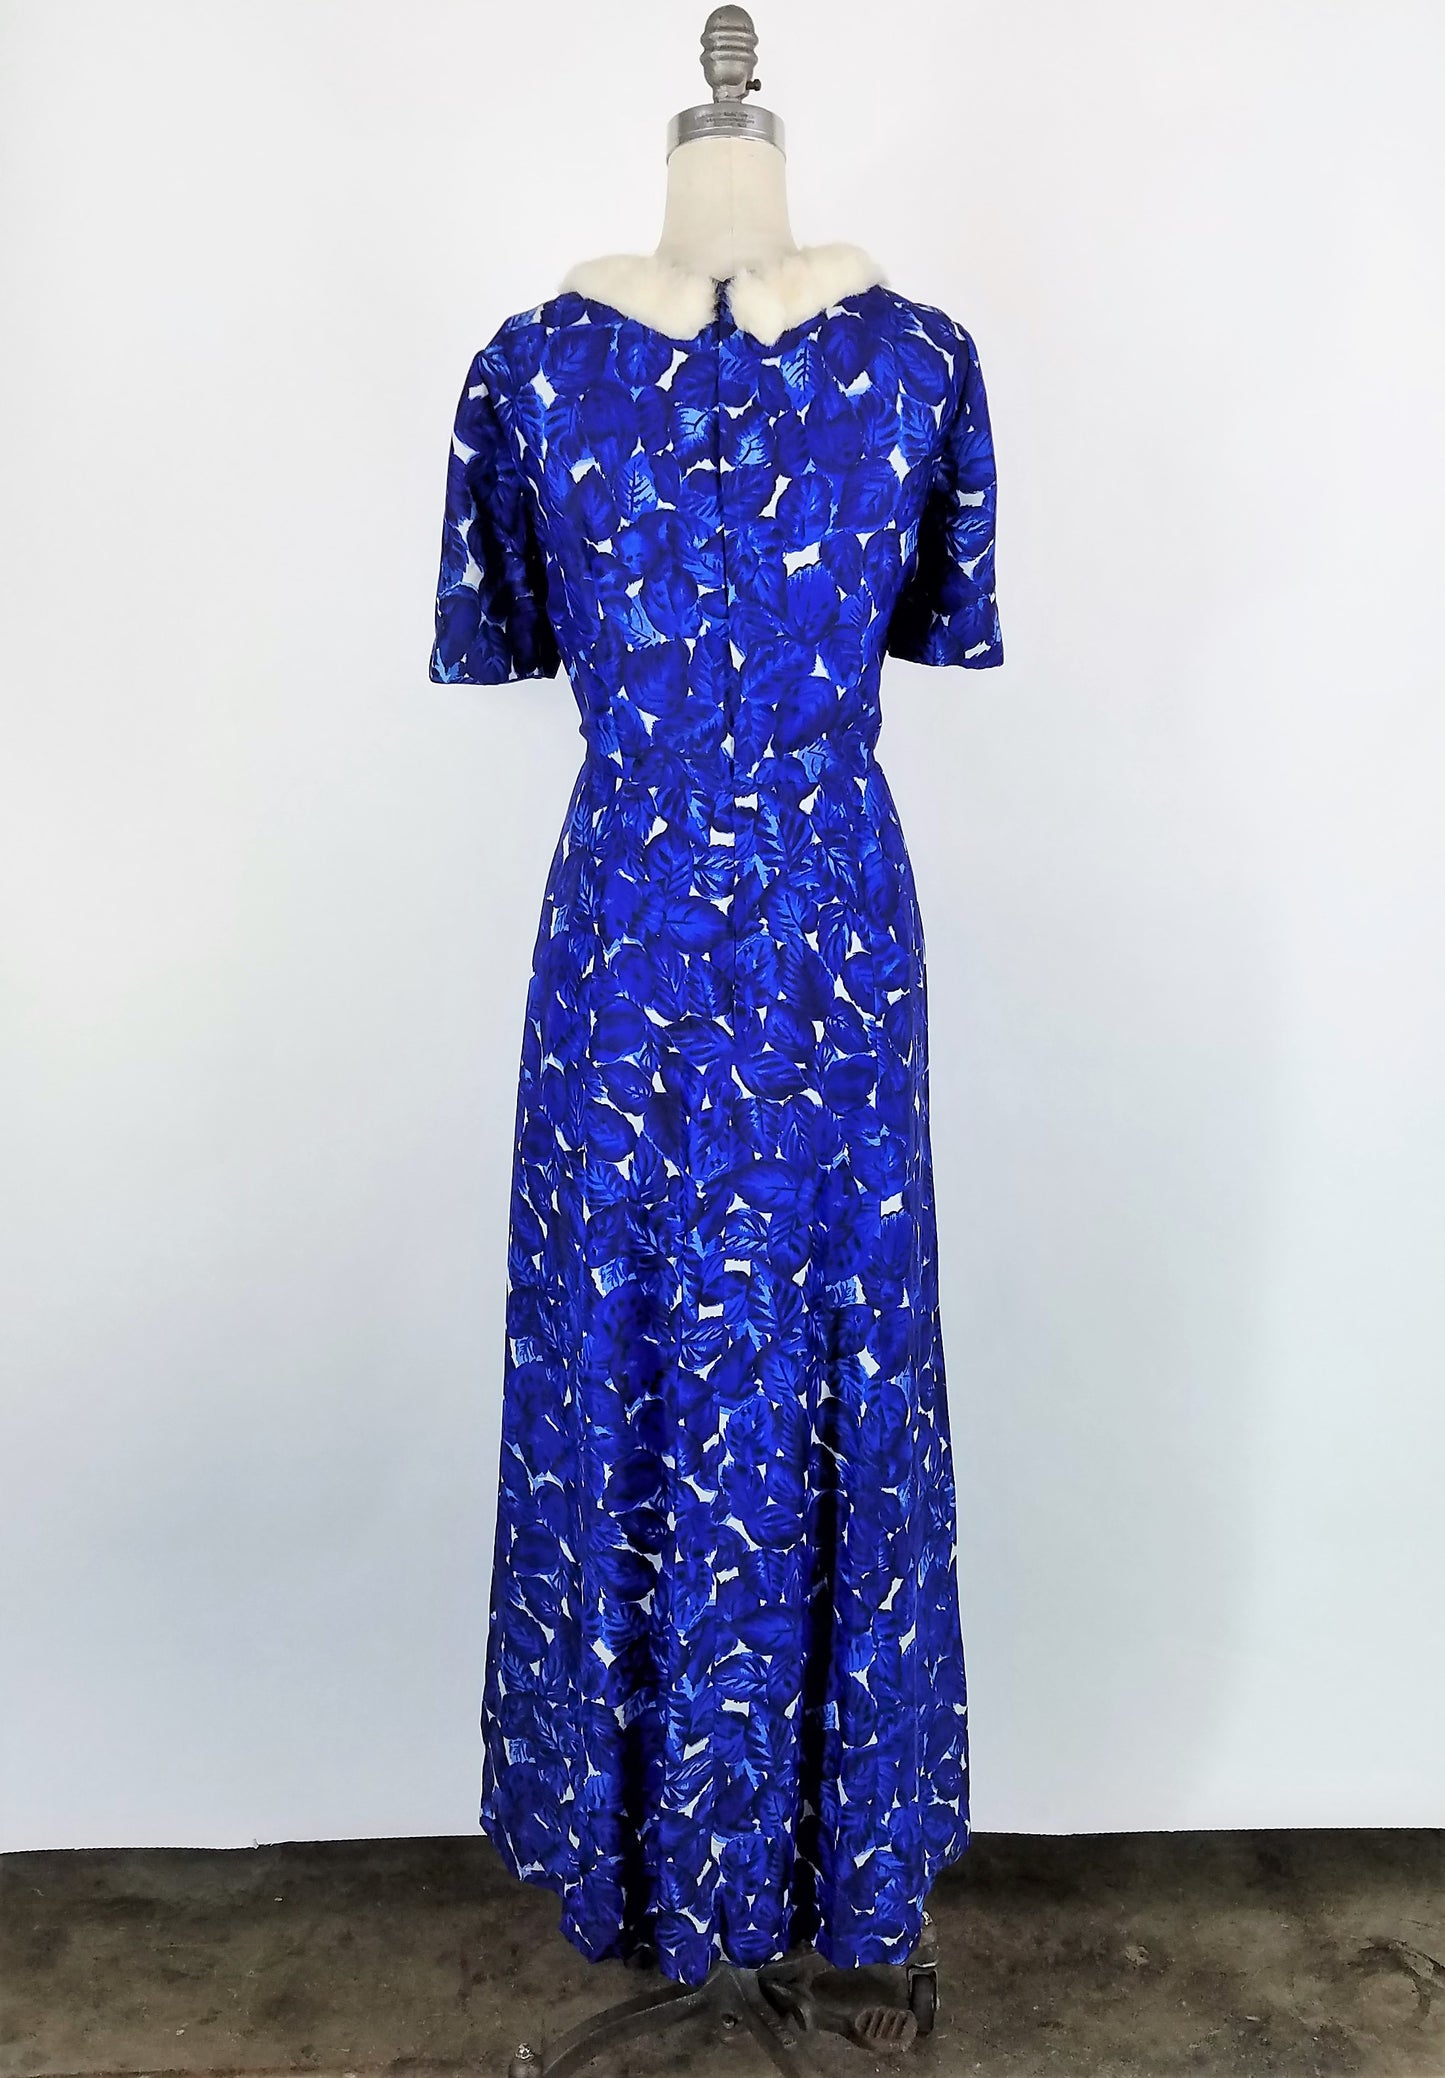 Vintage 1960s Blue And White Leaf Print Dress With Faux Fur Collar ...